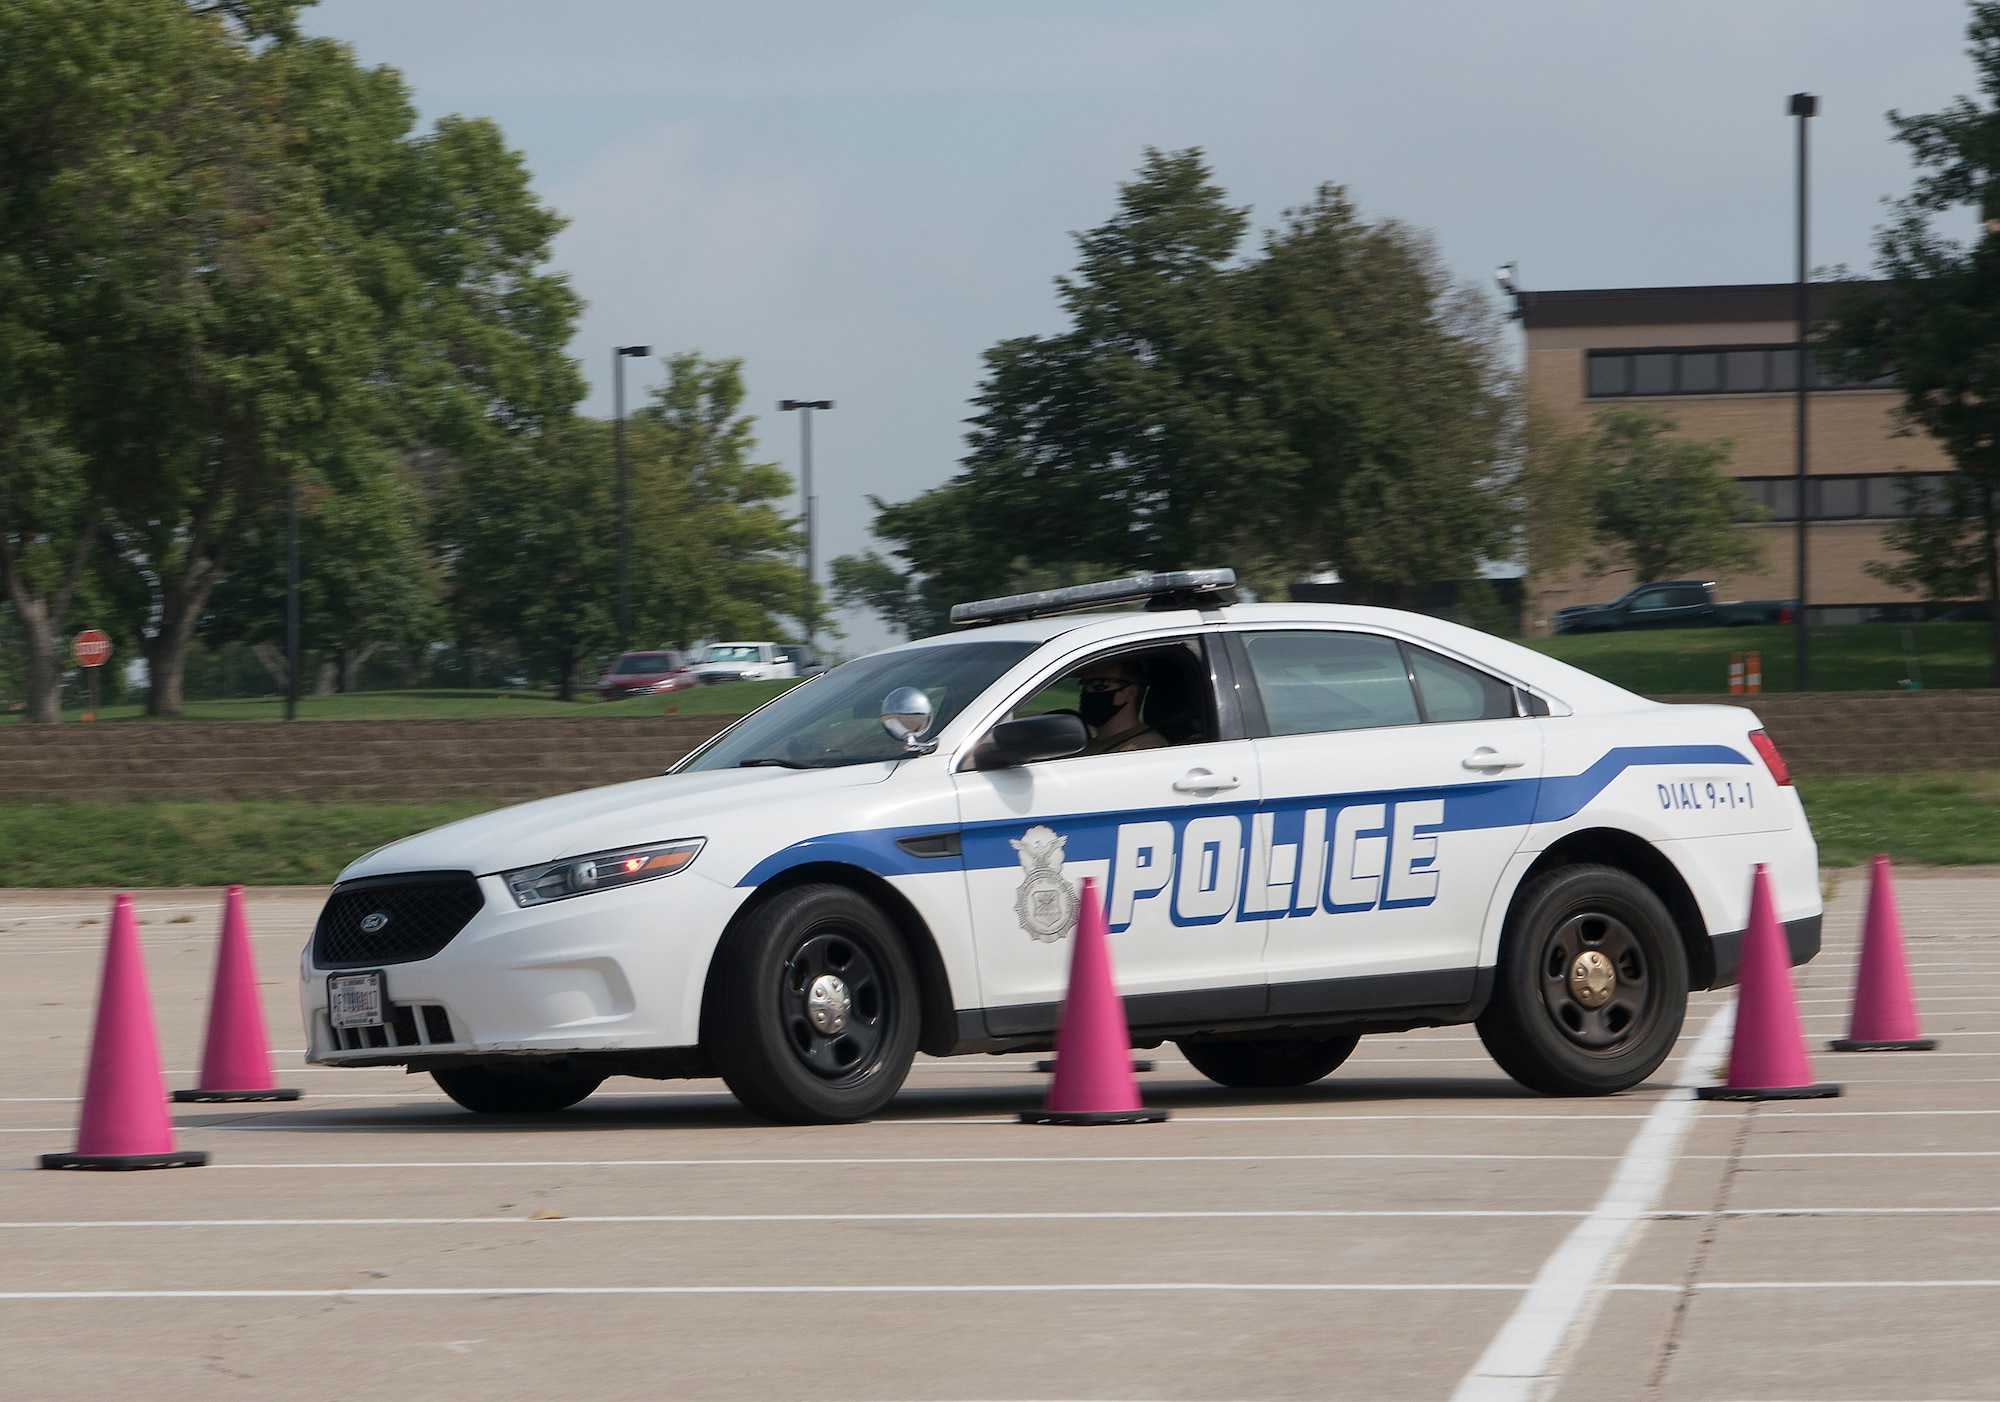 A stand-alone photo of emergency driving training.